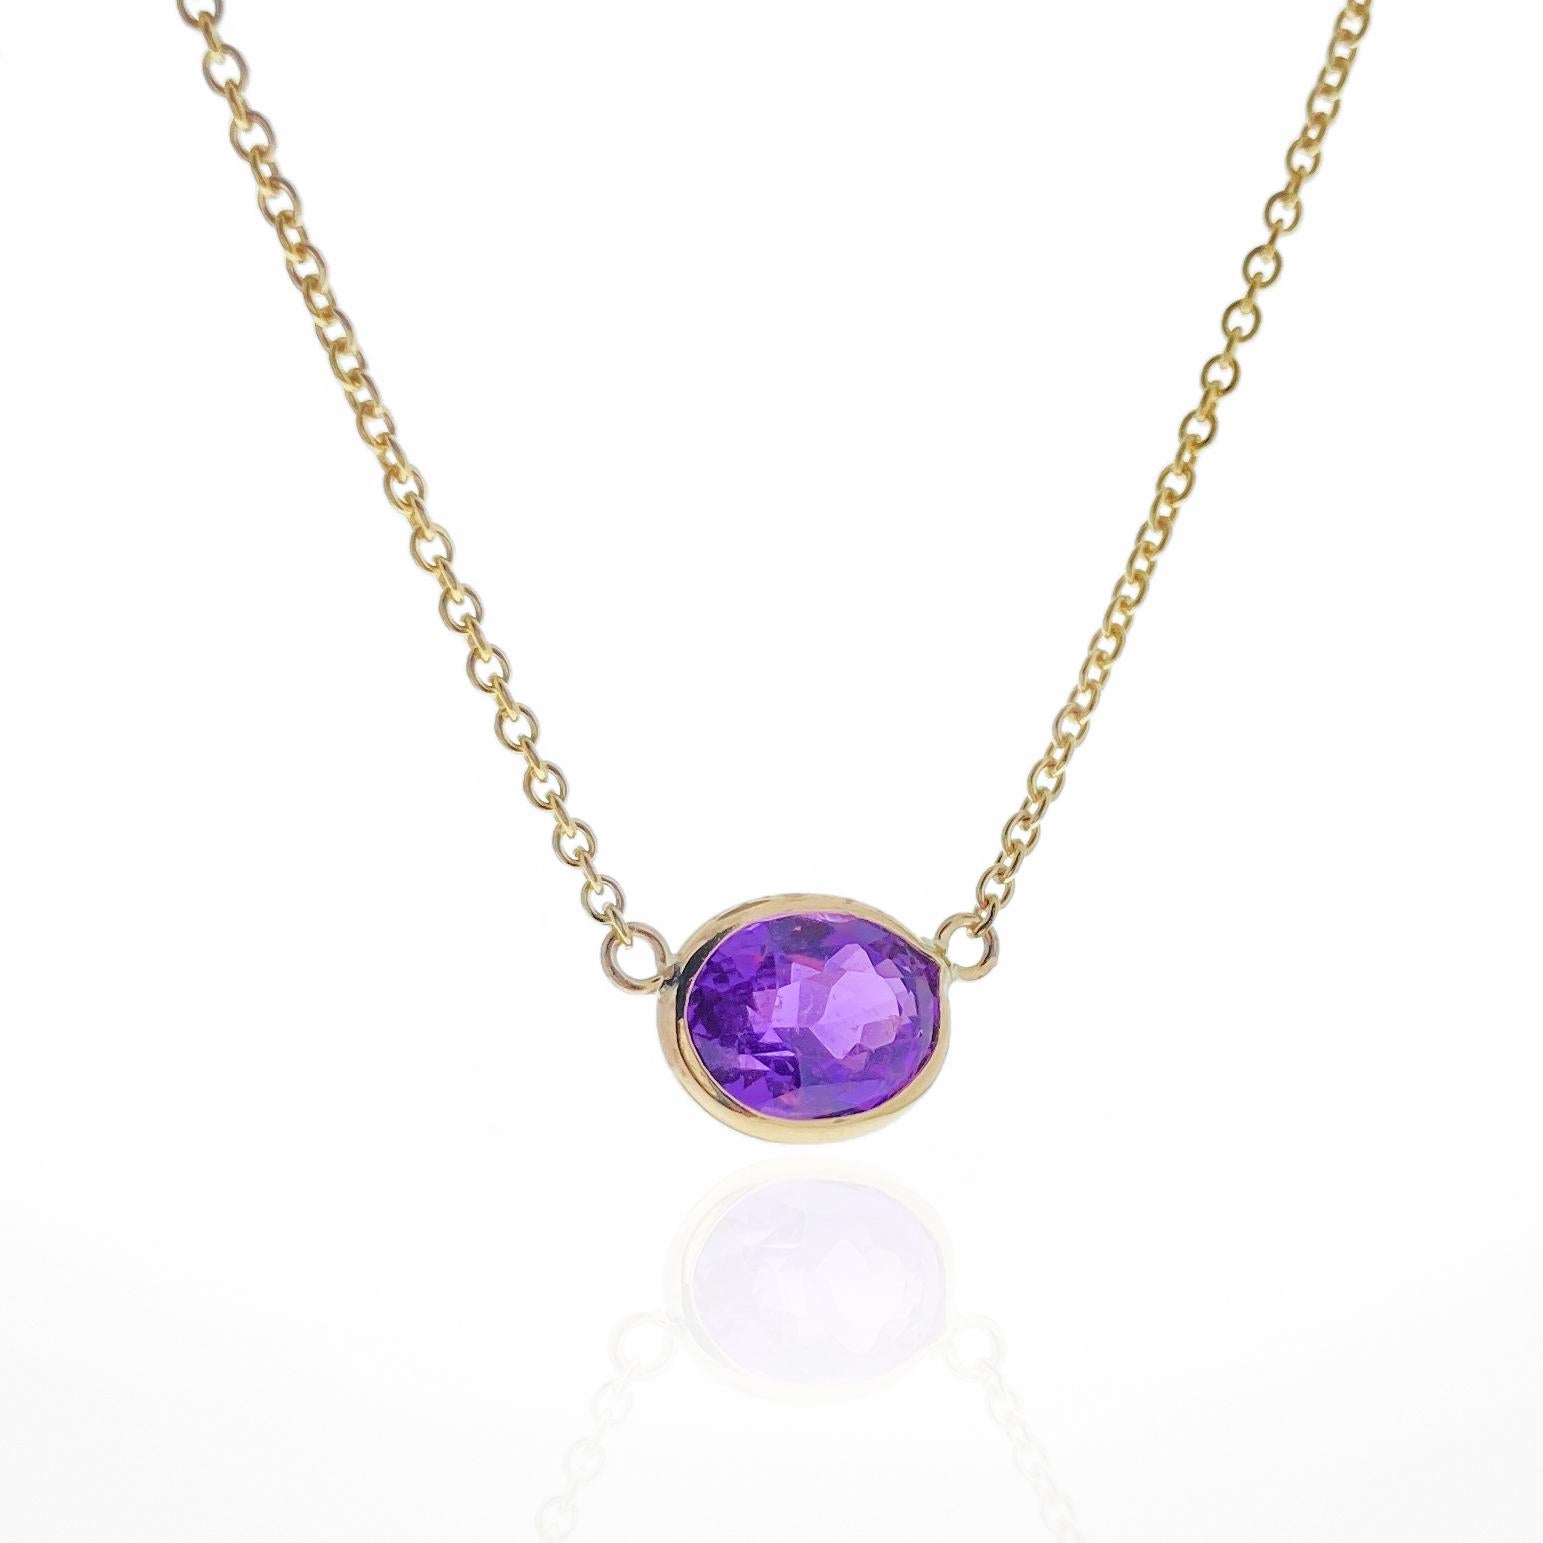 This necklace features an oval-cut purple sapphire with a weight of 3.15 carats, set in 14k yellow gold (YG). Purple sapphires are valued for their lovely purple hue, and the oval cut is a classic and elegant choice for gemstones, offering a